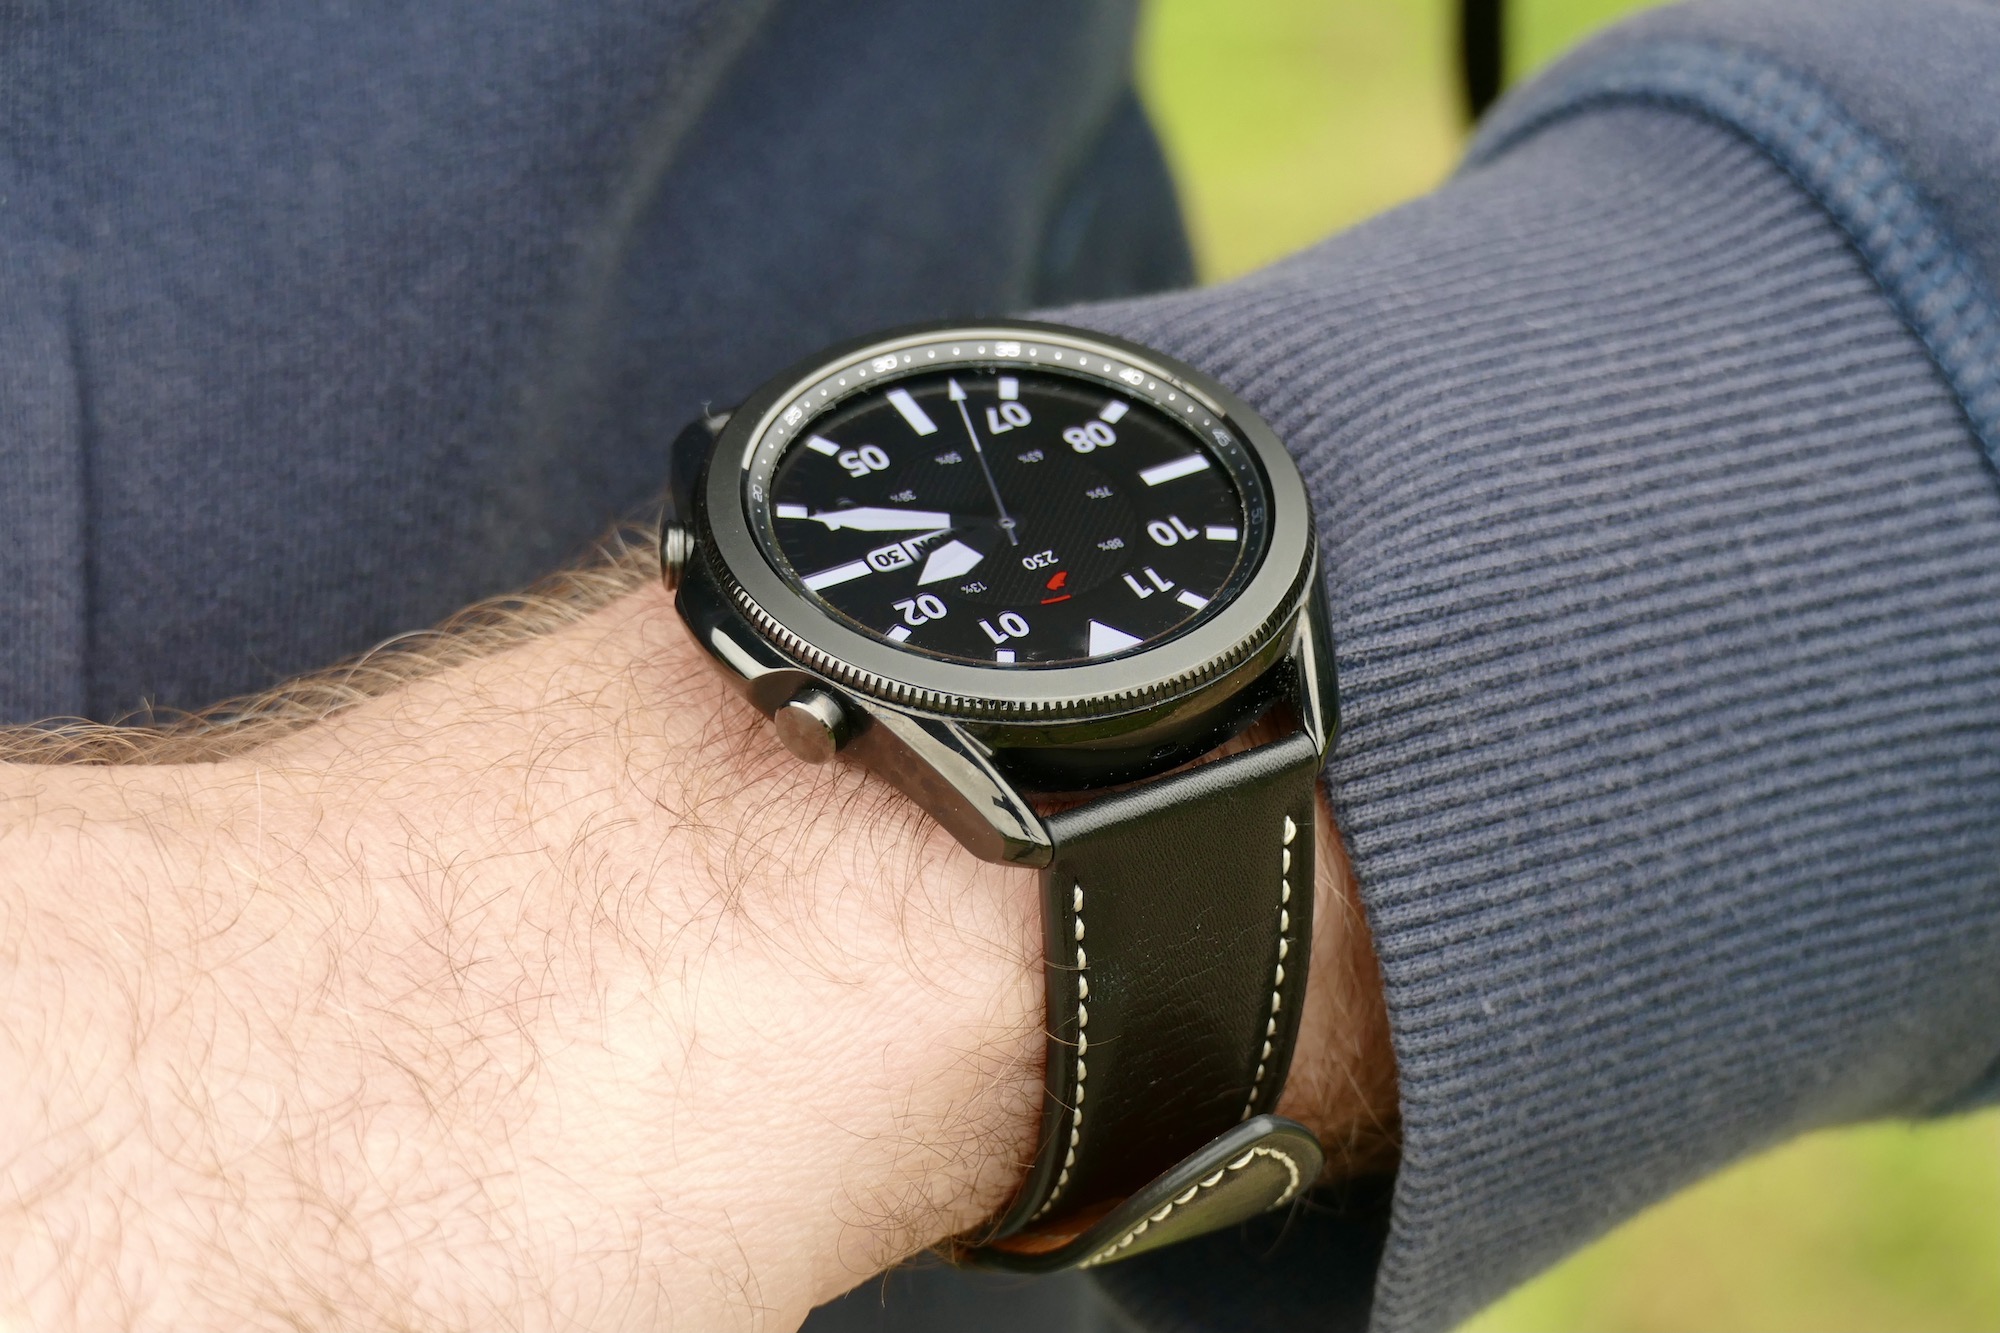 Galaxy Watch 3 on the wrist, seen from the side.